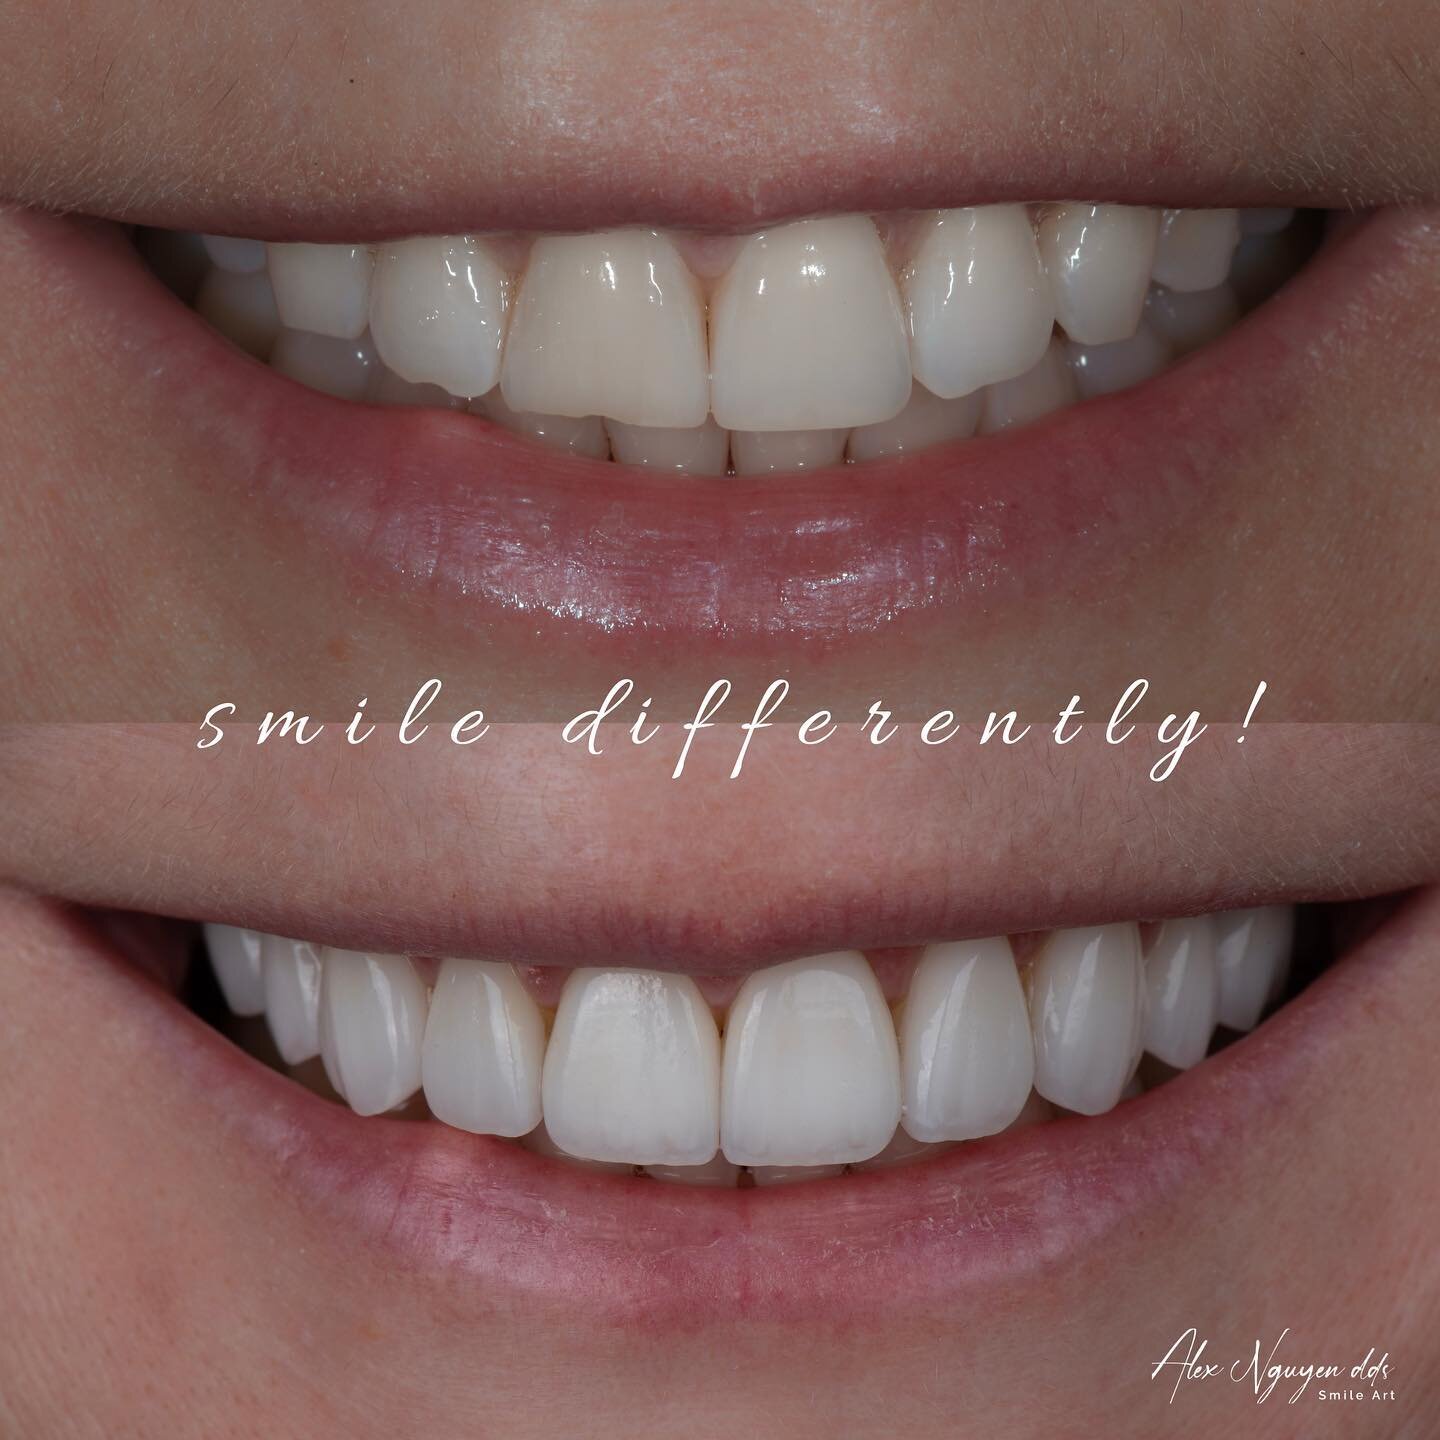 Notice the lip line change after the smile has been enhanced.  When the patient is no longer conscious of chipped and uneven smile line, the lips move naturally to display a wider and more dynamic smile.
-
-
-
-
#smiledesign #porcelainveneers #beauti